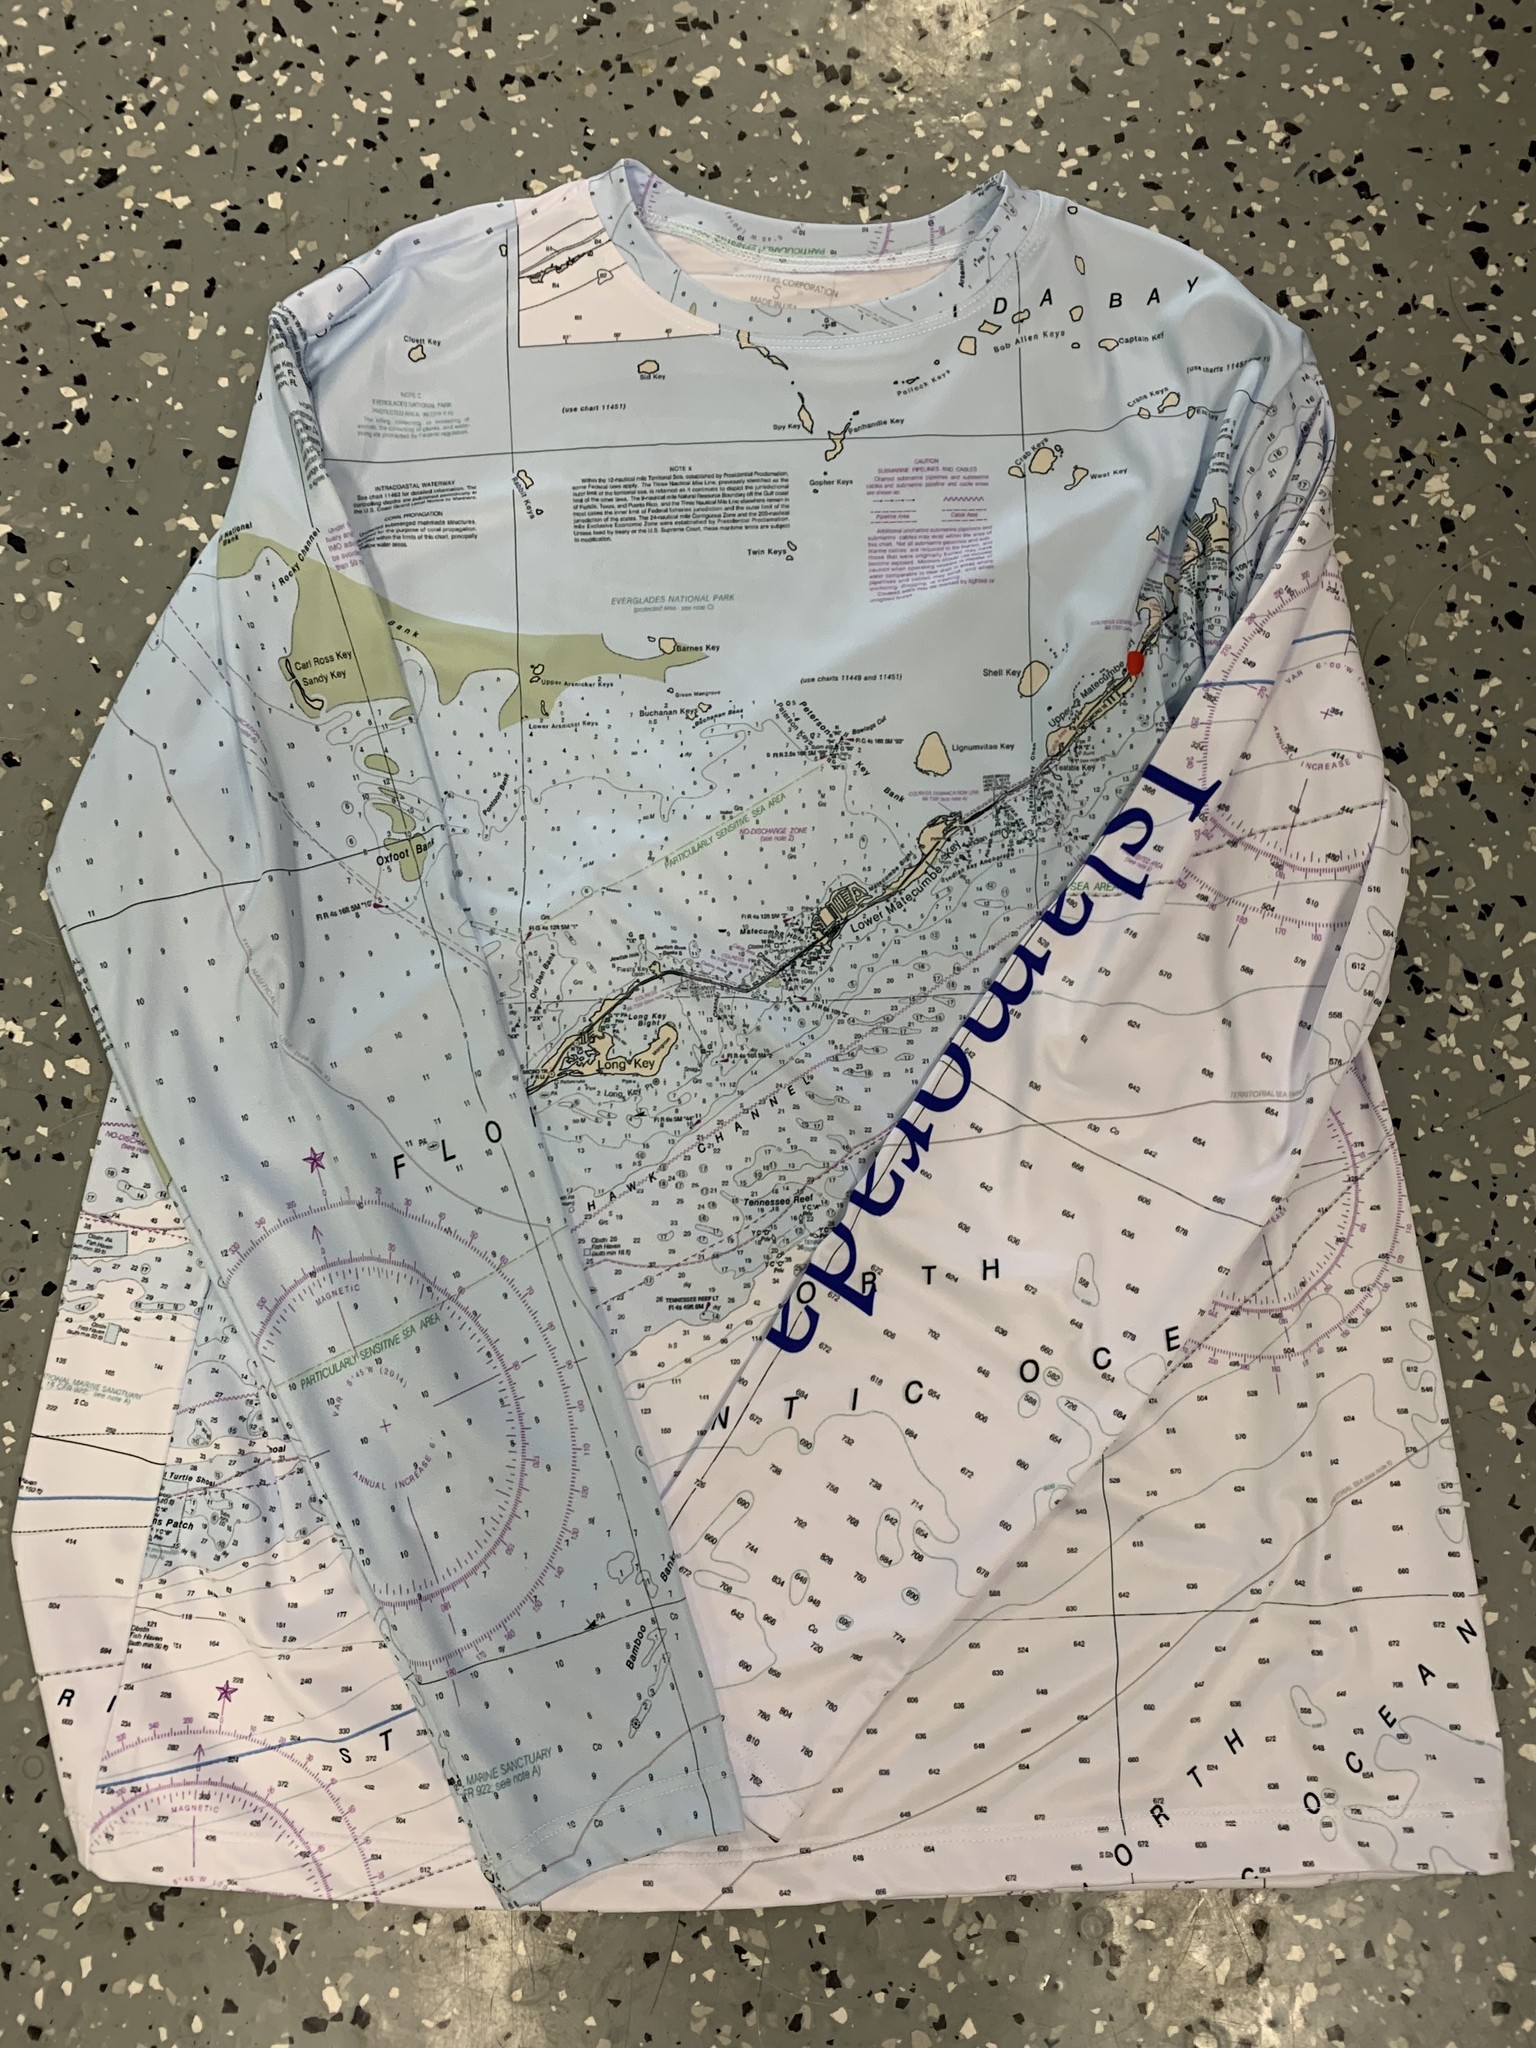 A1A Outfitters Corp. Shirt Chart / Map